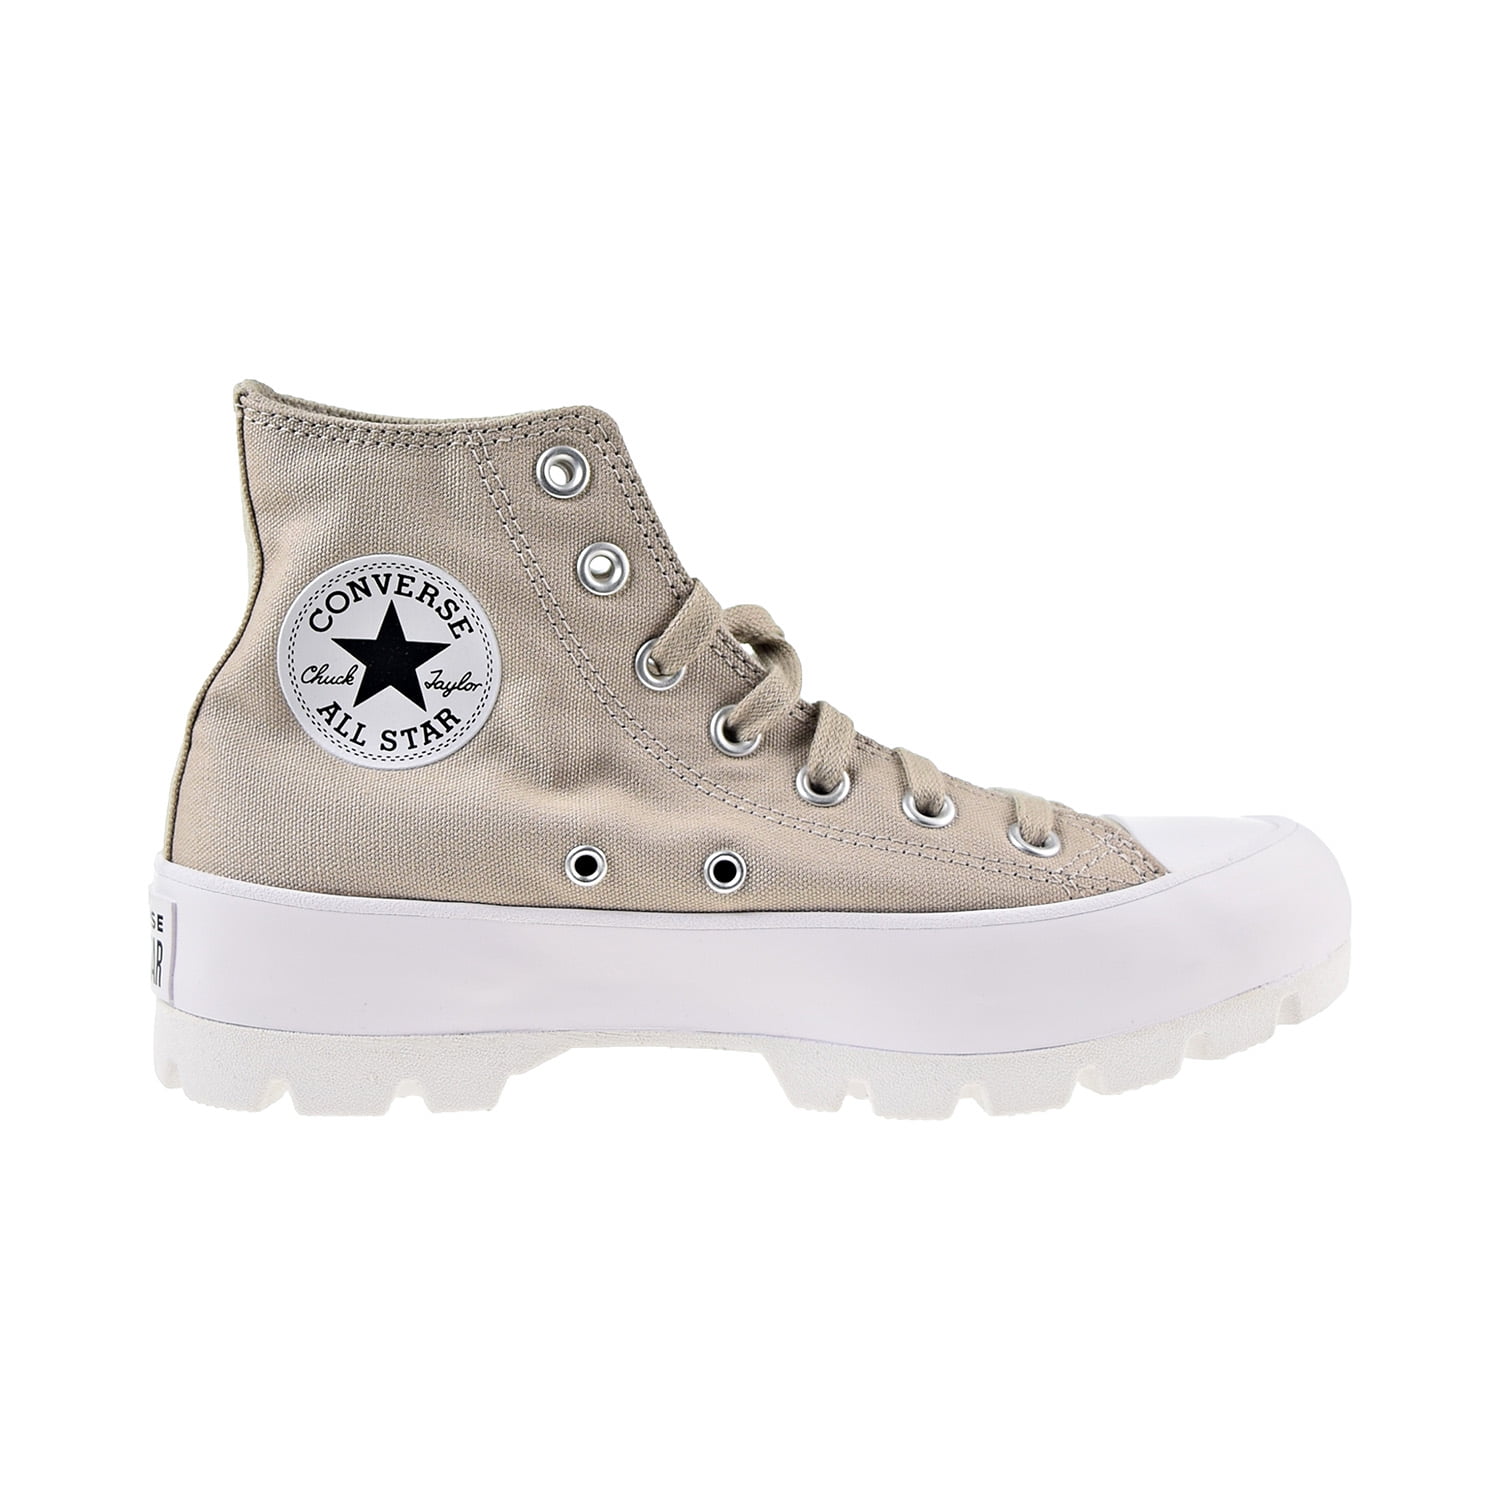 Converse Chuck Taylor All Star Lugged Hi Women's Shoes Papyrus-White 566285c